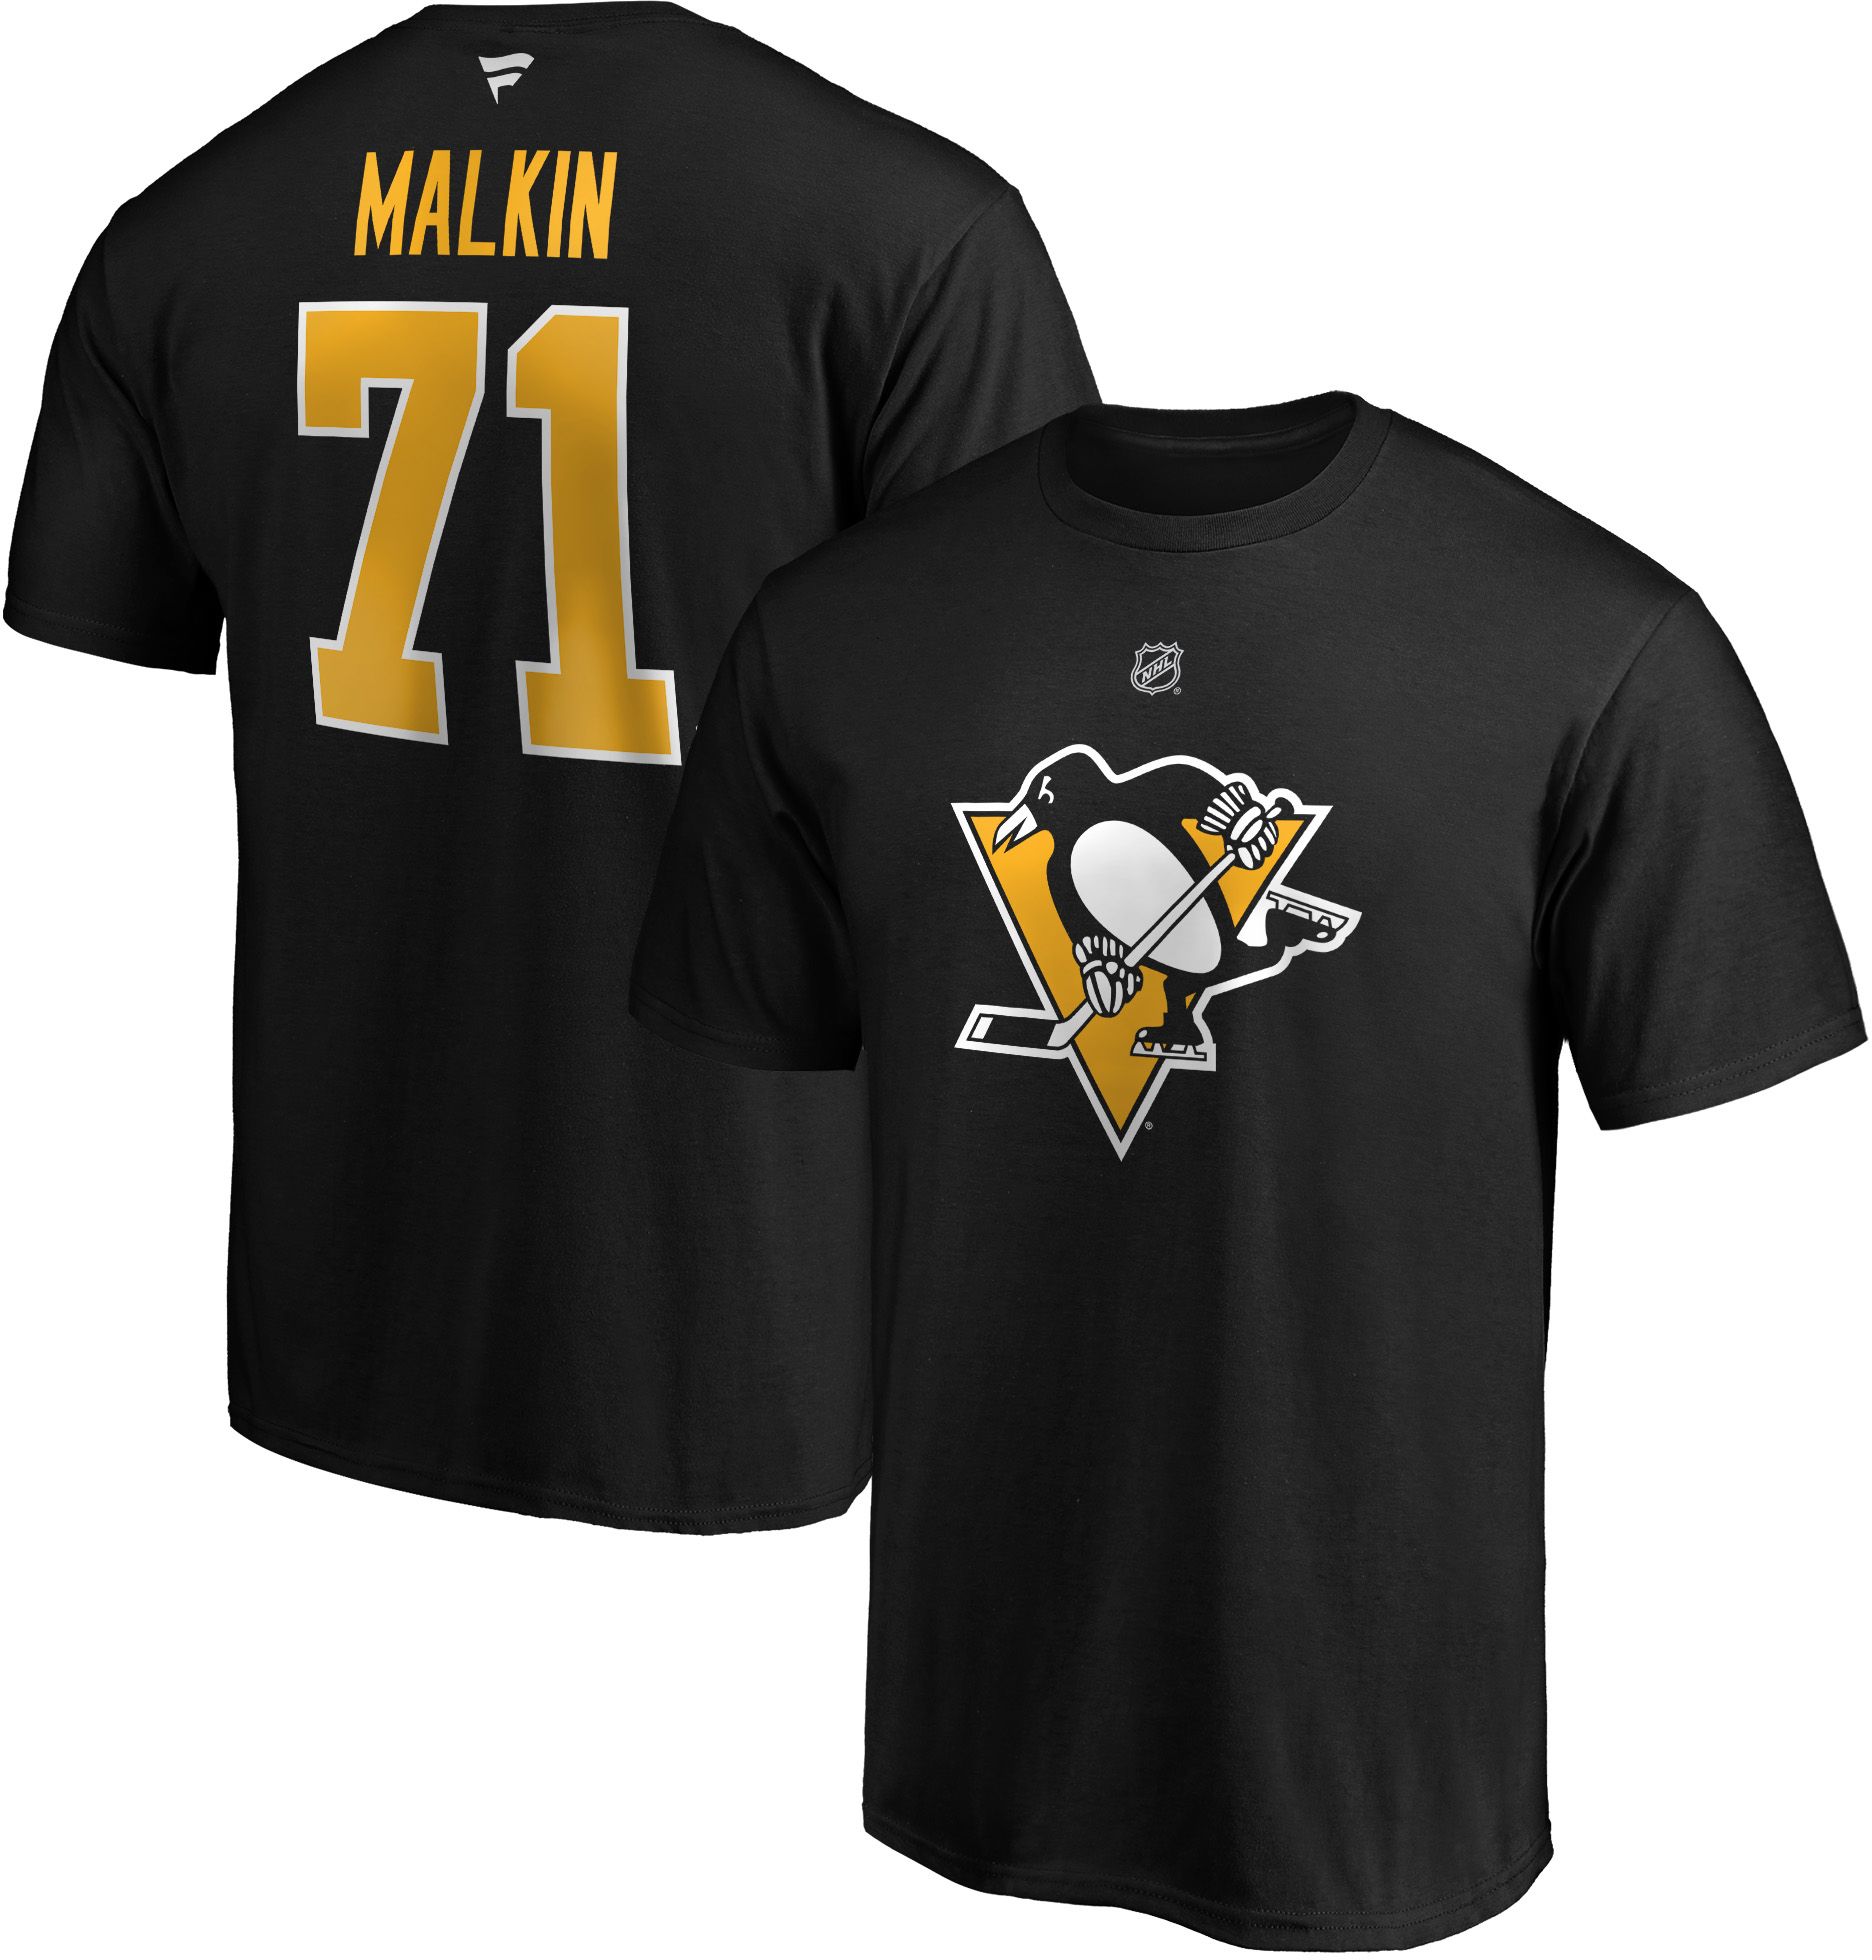 NHL Youth Pittsburgh Penguins Evgeni Malkin #71 Replica Home Jersey